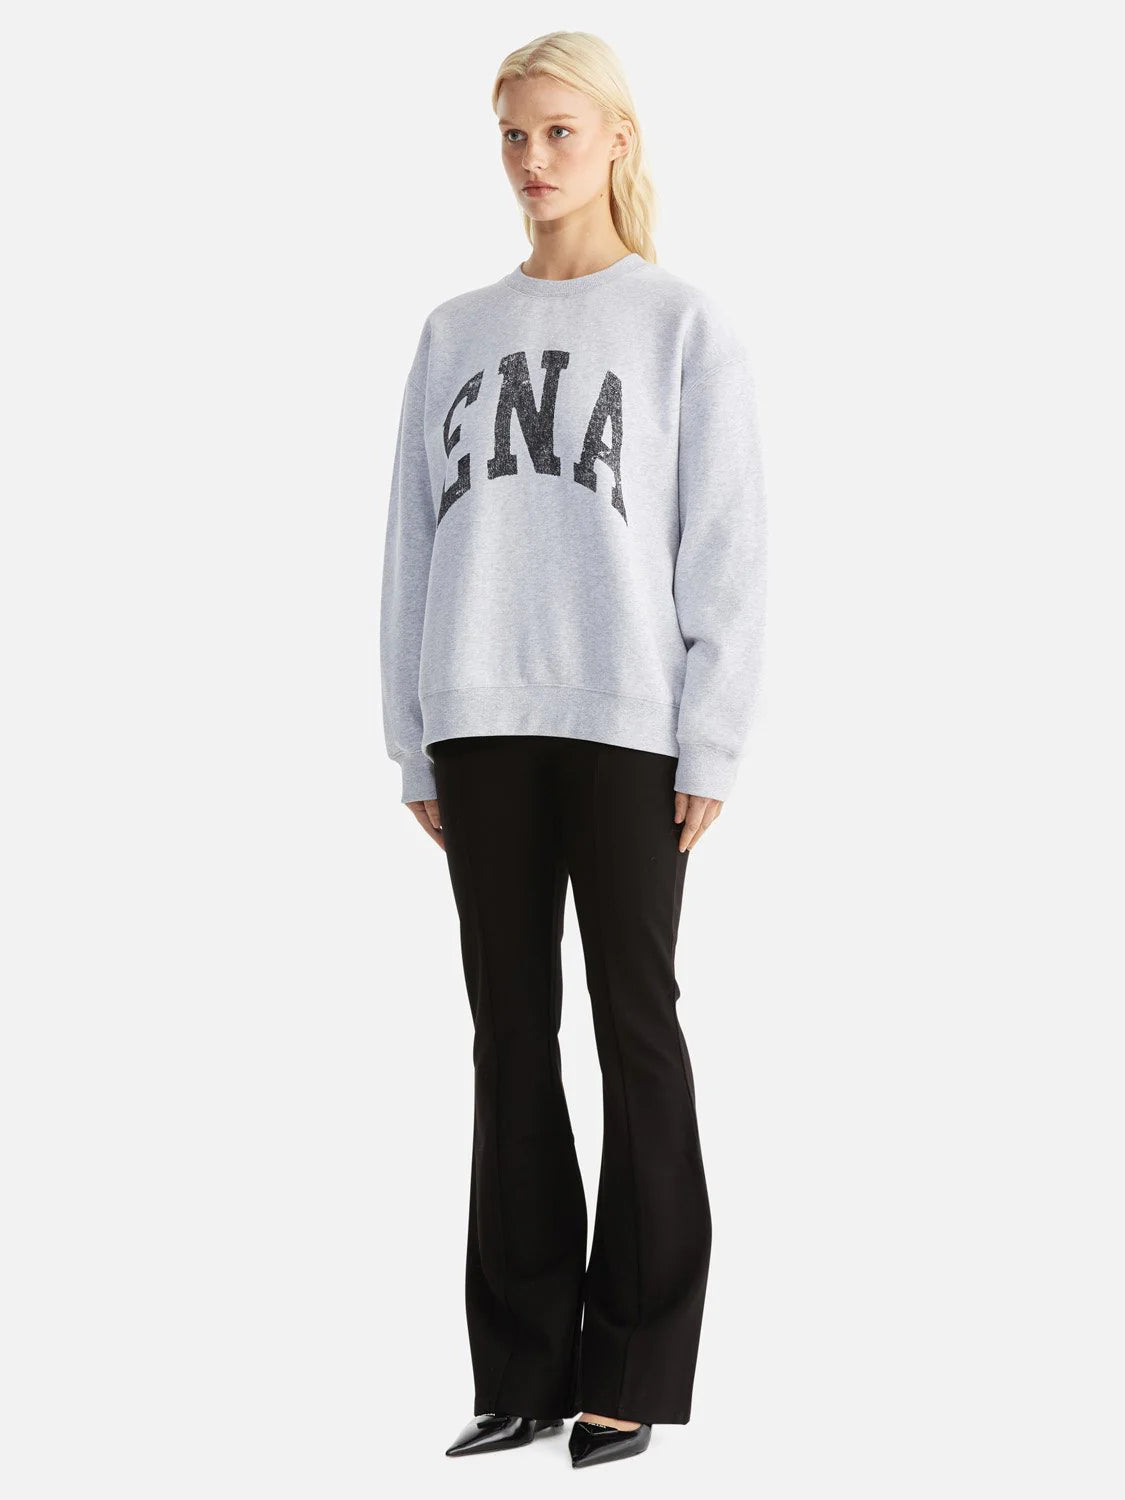 ENA PELLY | LILLY OVERSIZED SWEATER COLLEGE